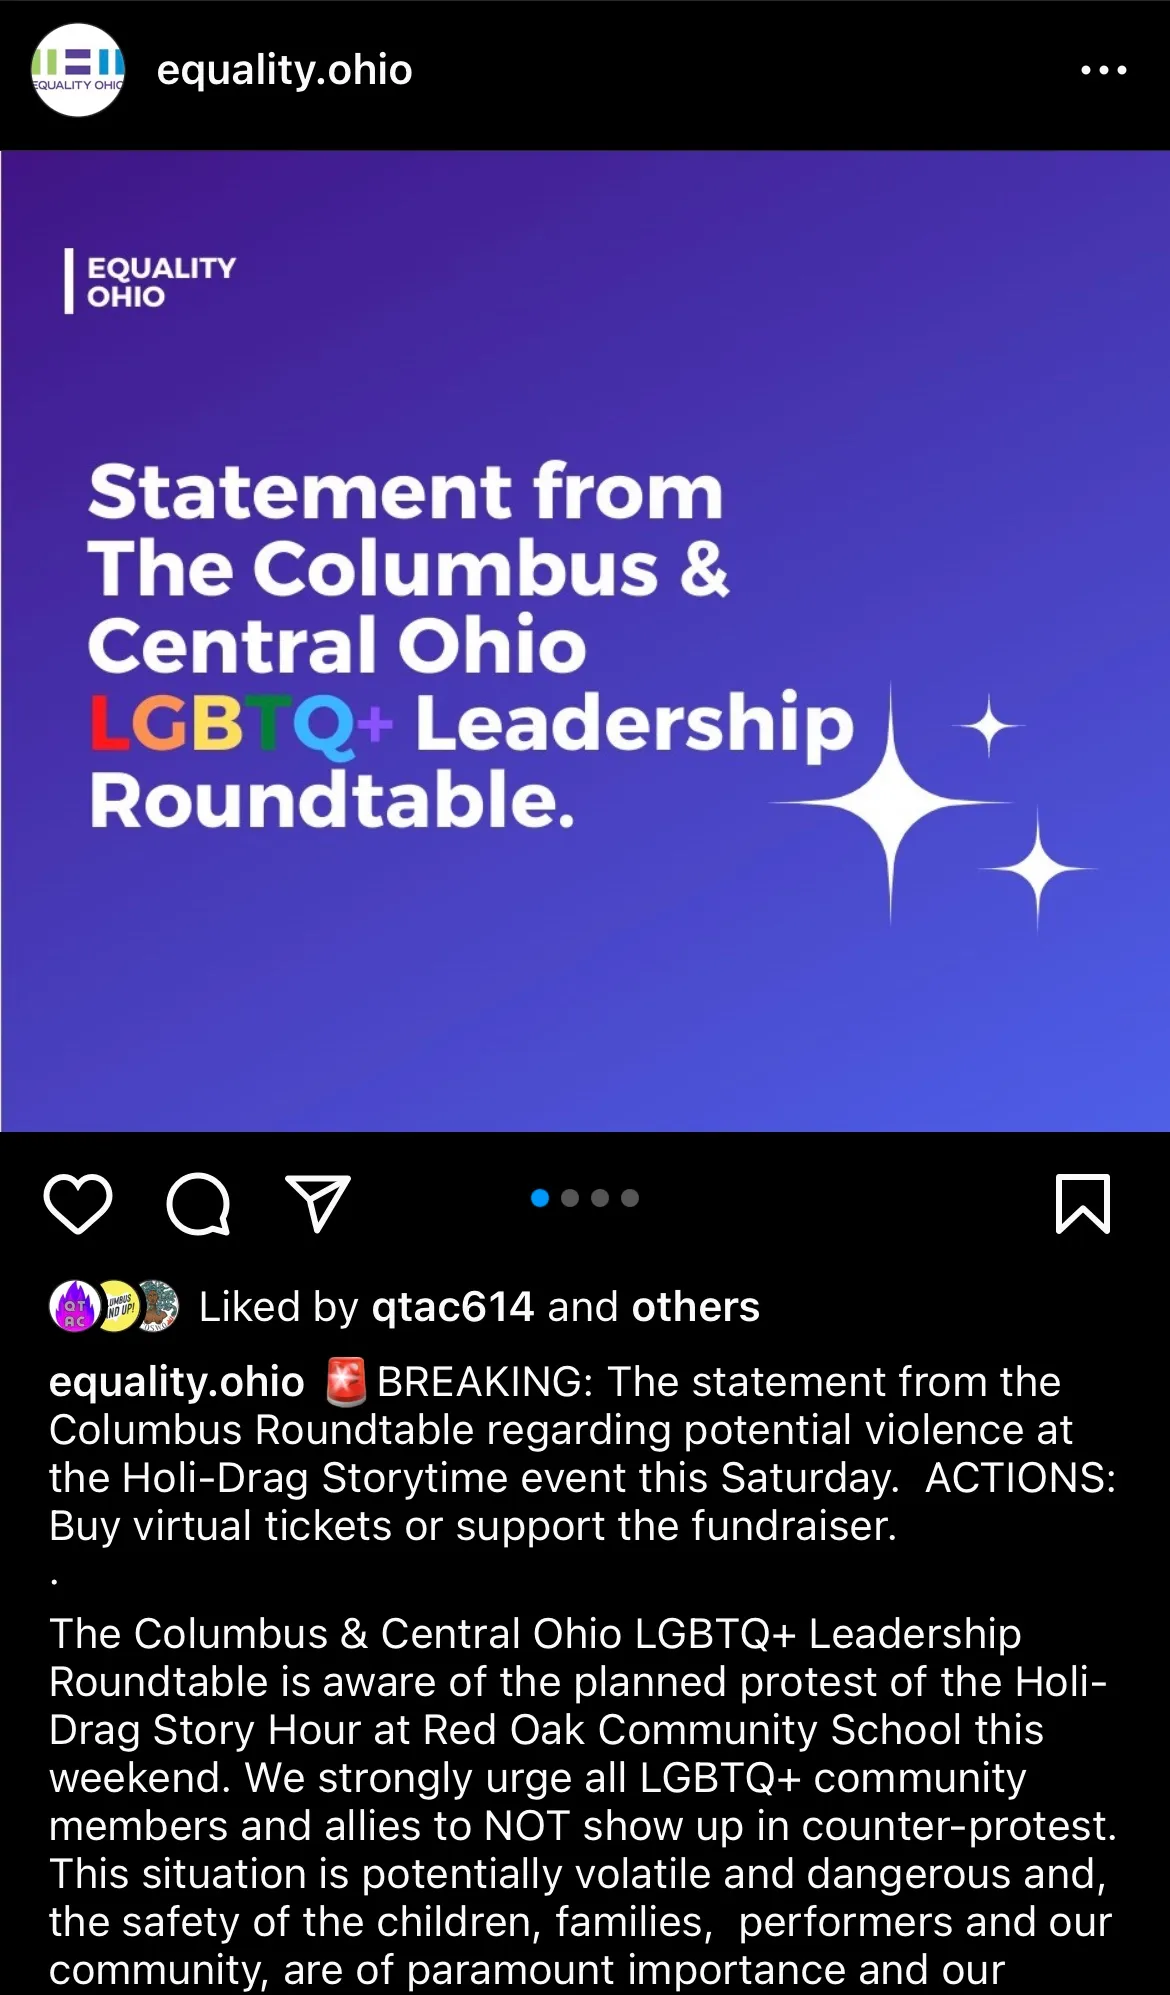 image description shows IG post from Equality Ohio reading: Statement from The Columbus & Central Ohio LGBTQ+ Leadership Roundtable.